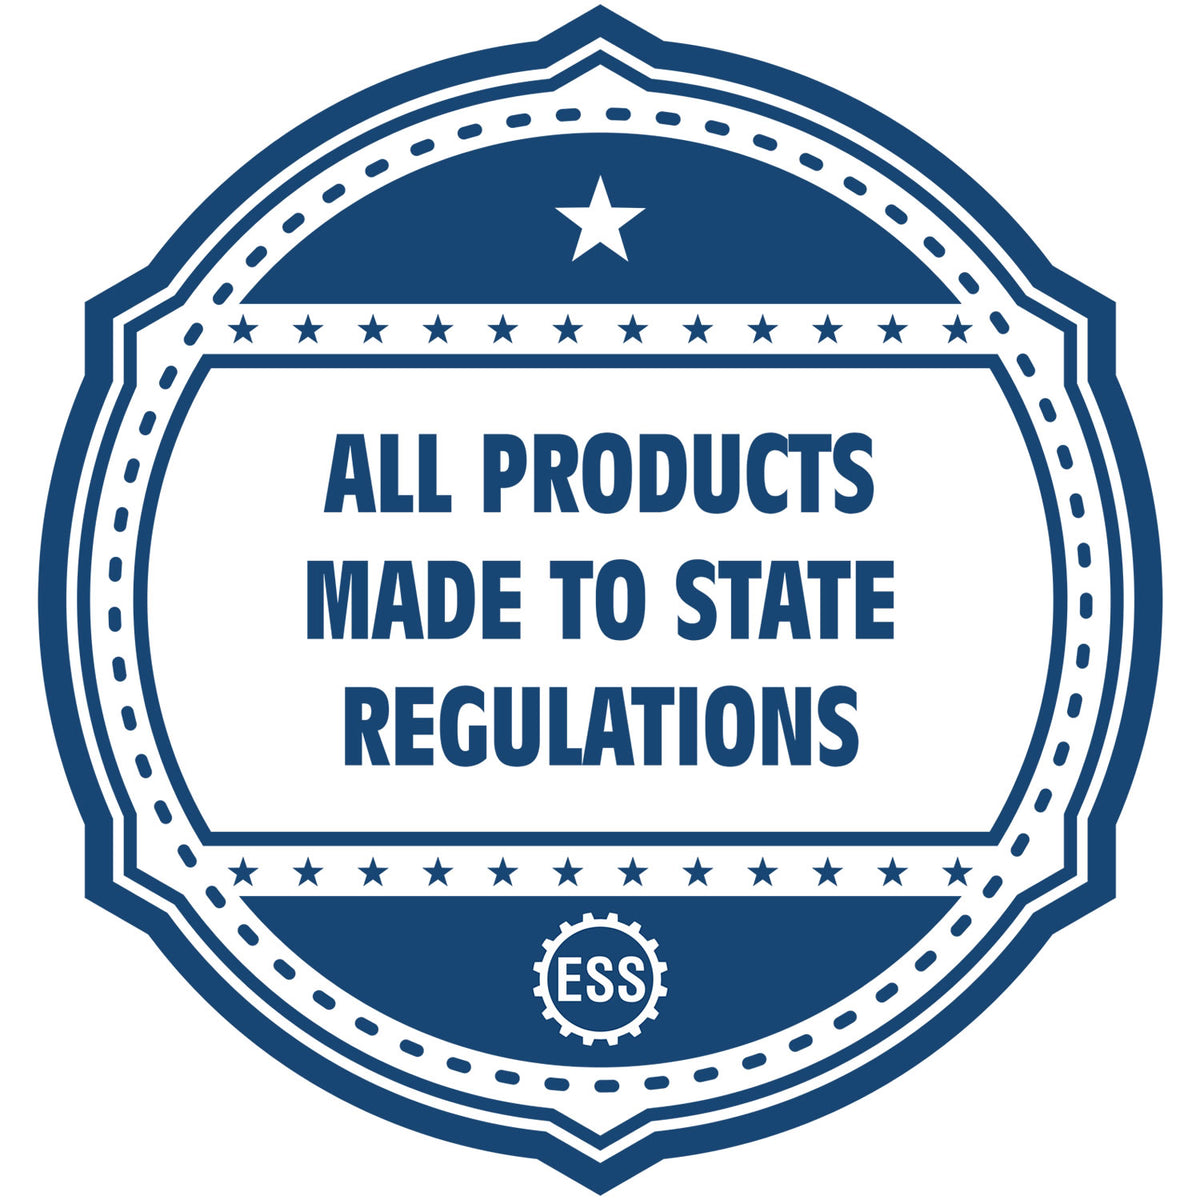 An icon or badge element for the Missouri Desk Surveyor Seal Embosser showing that this product is made in compliance with state regulations.